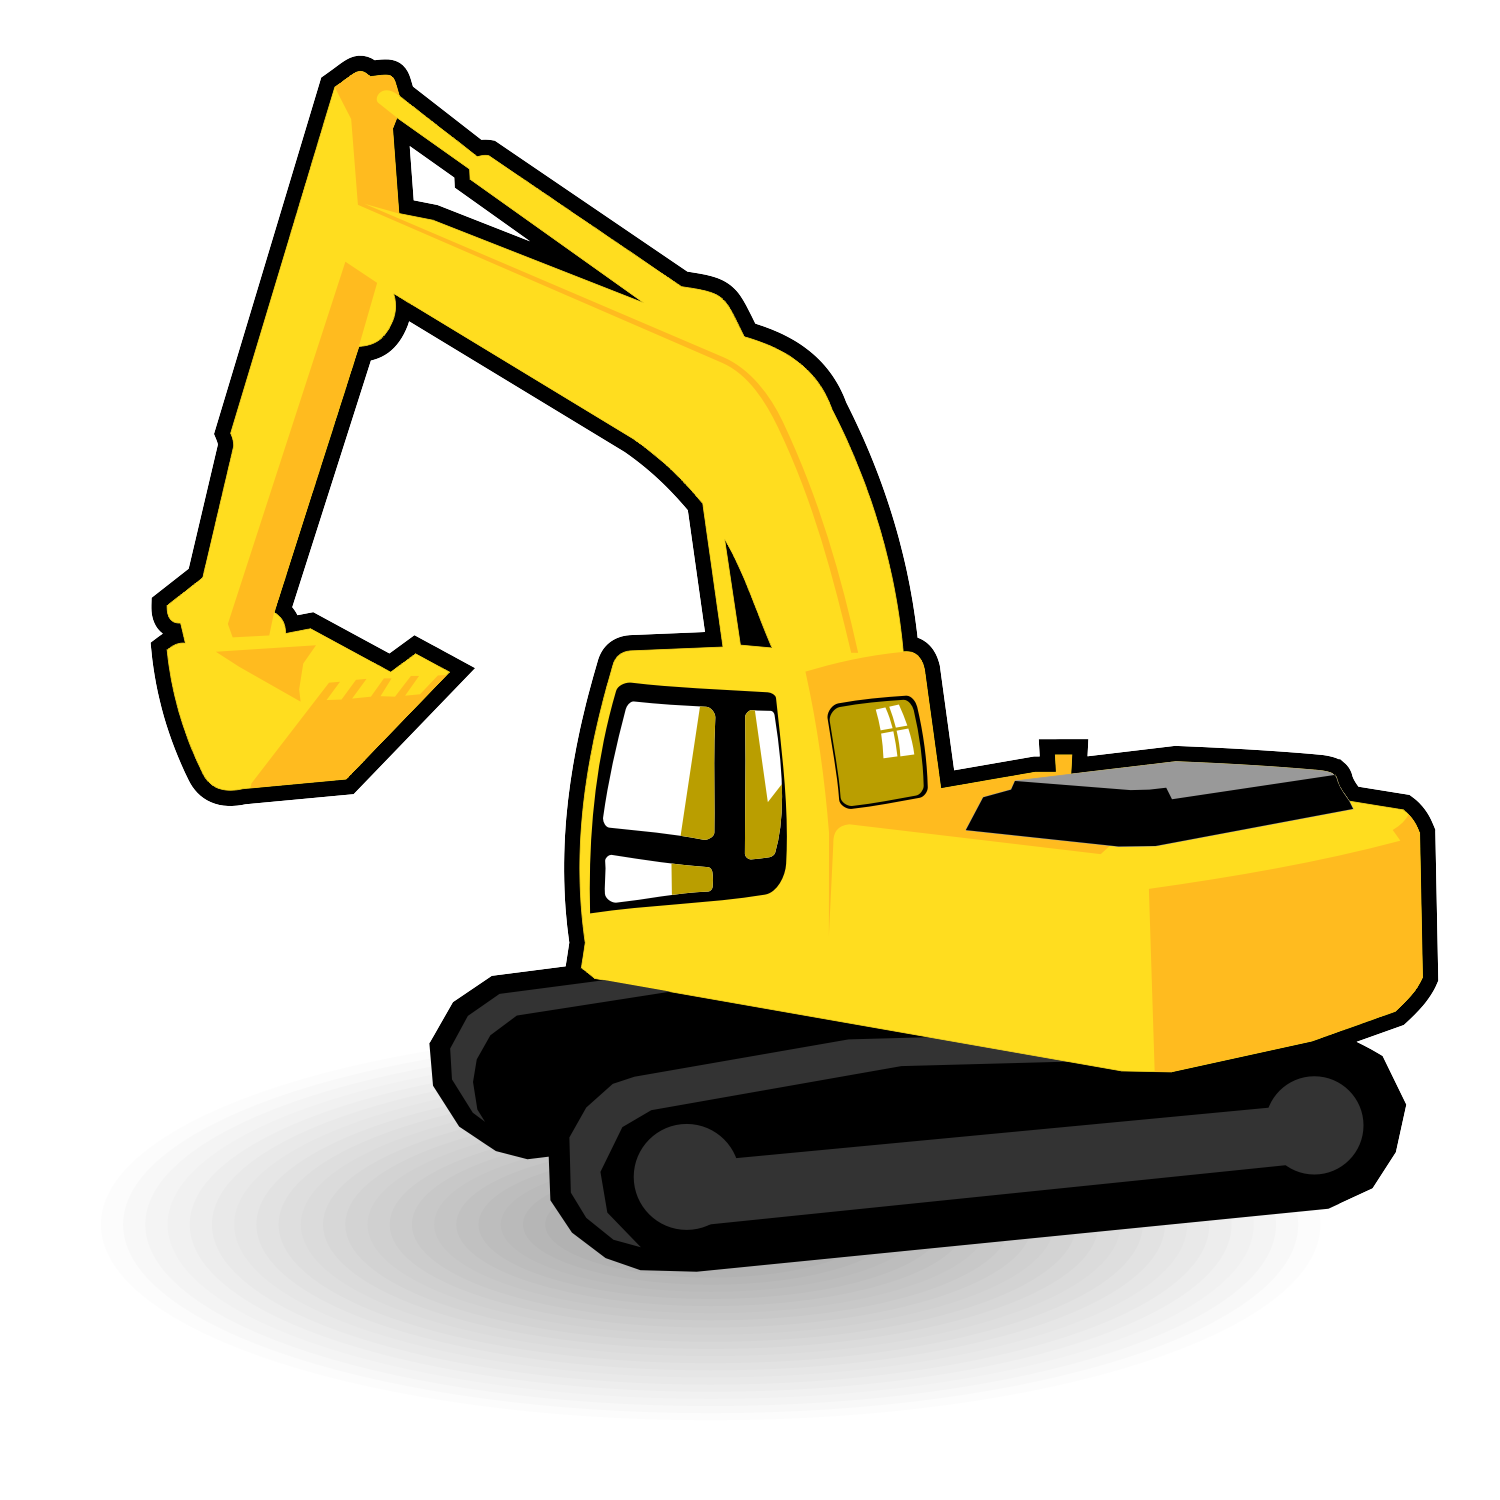 Download free vector category - Excavator Clipart